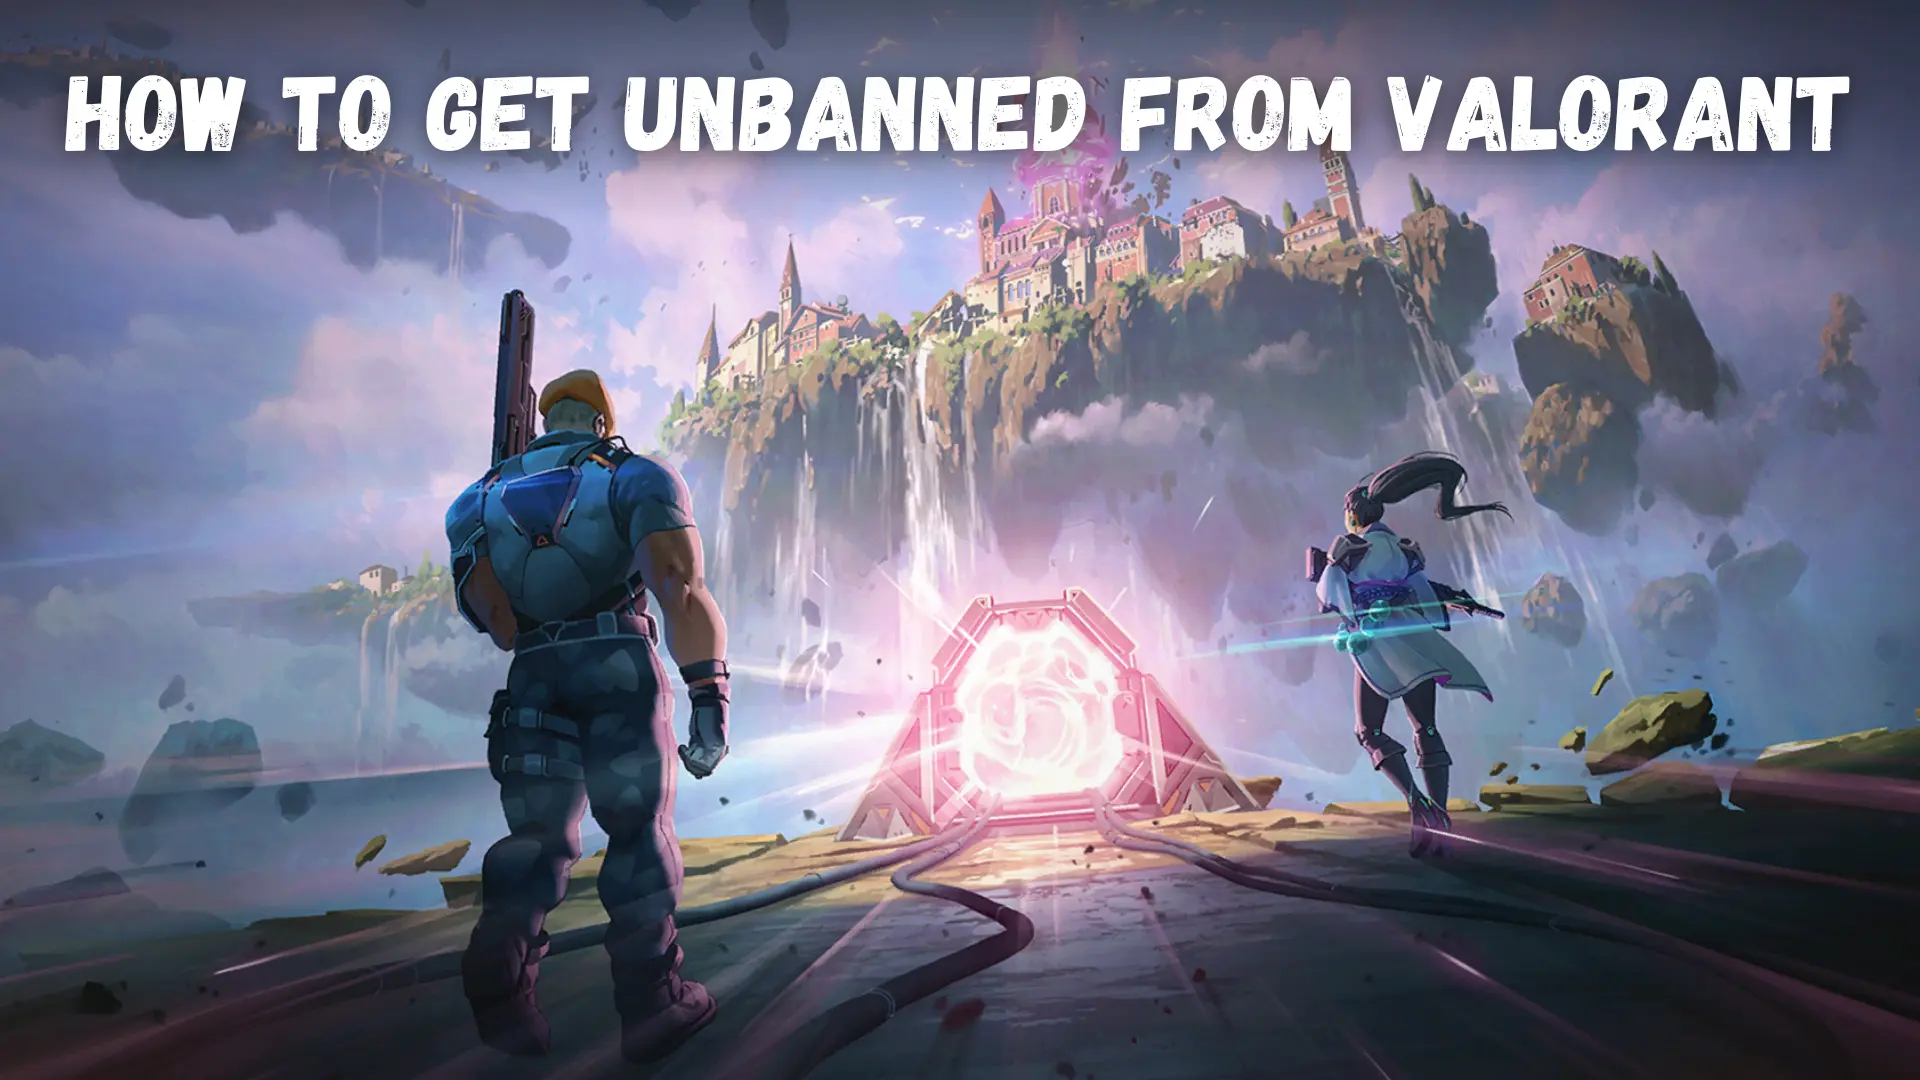 How to Get Unbanned from Valorant